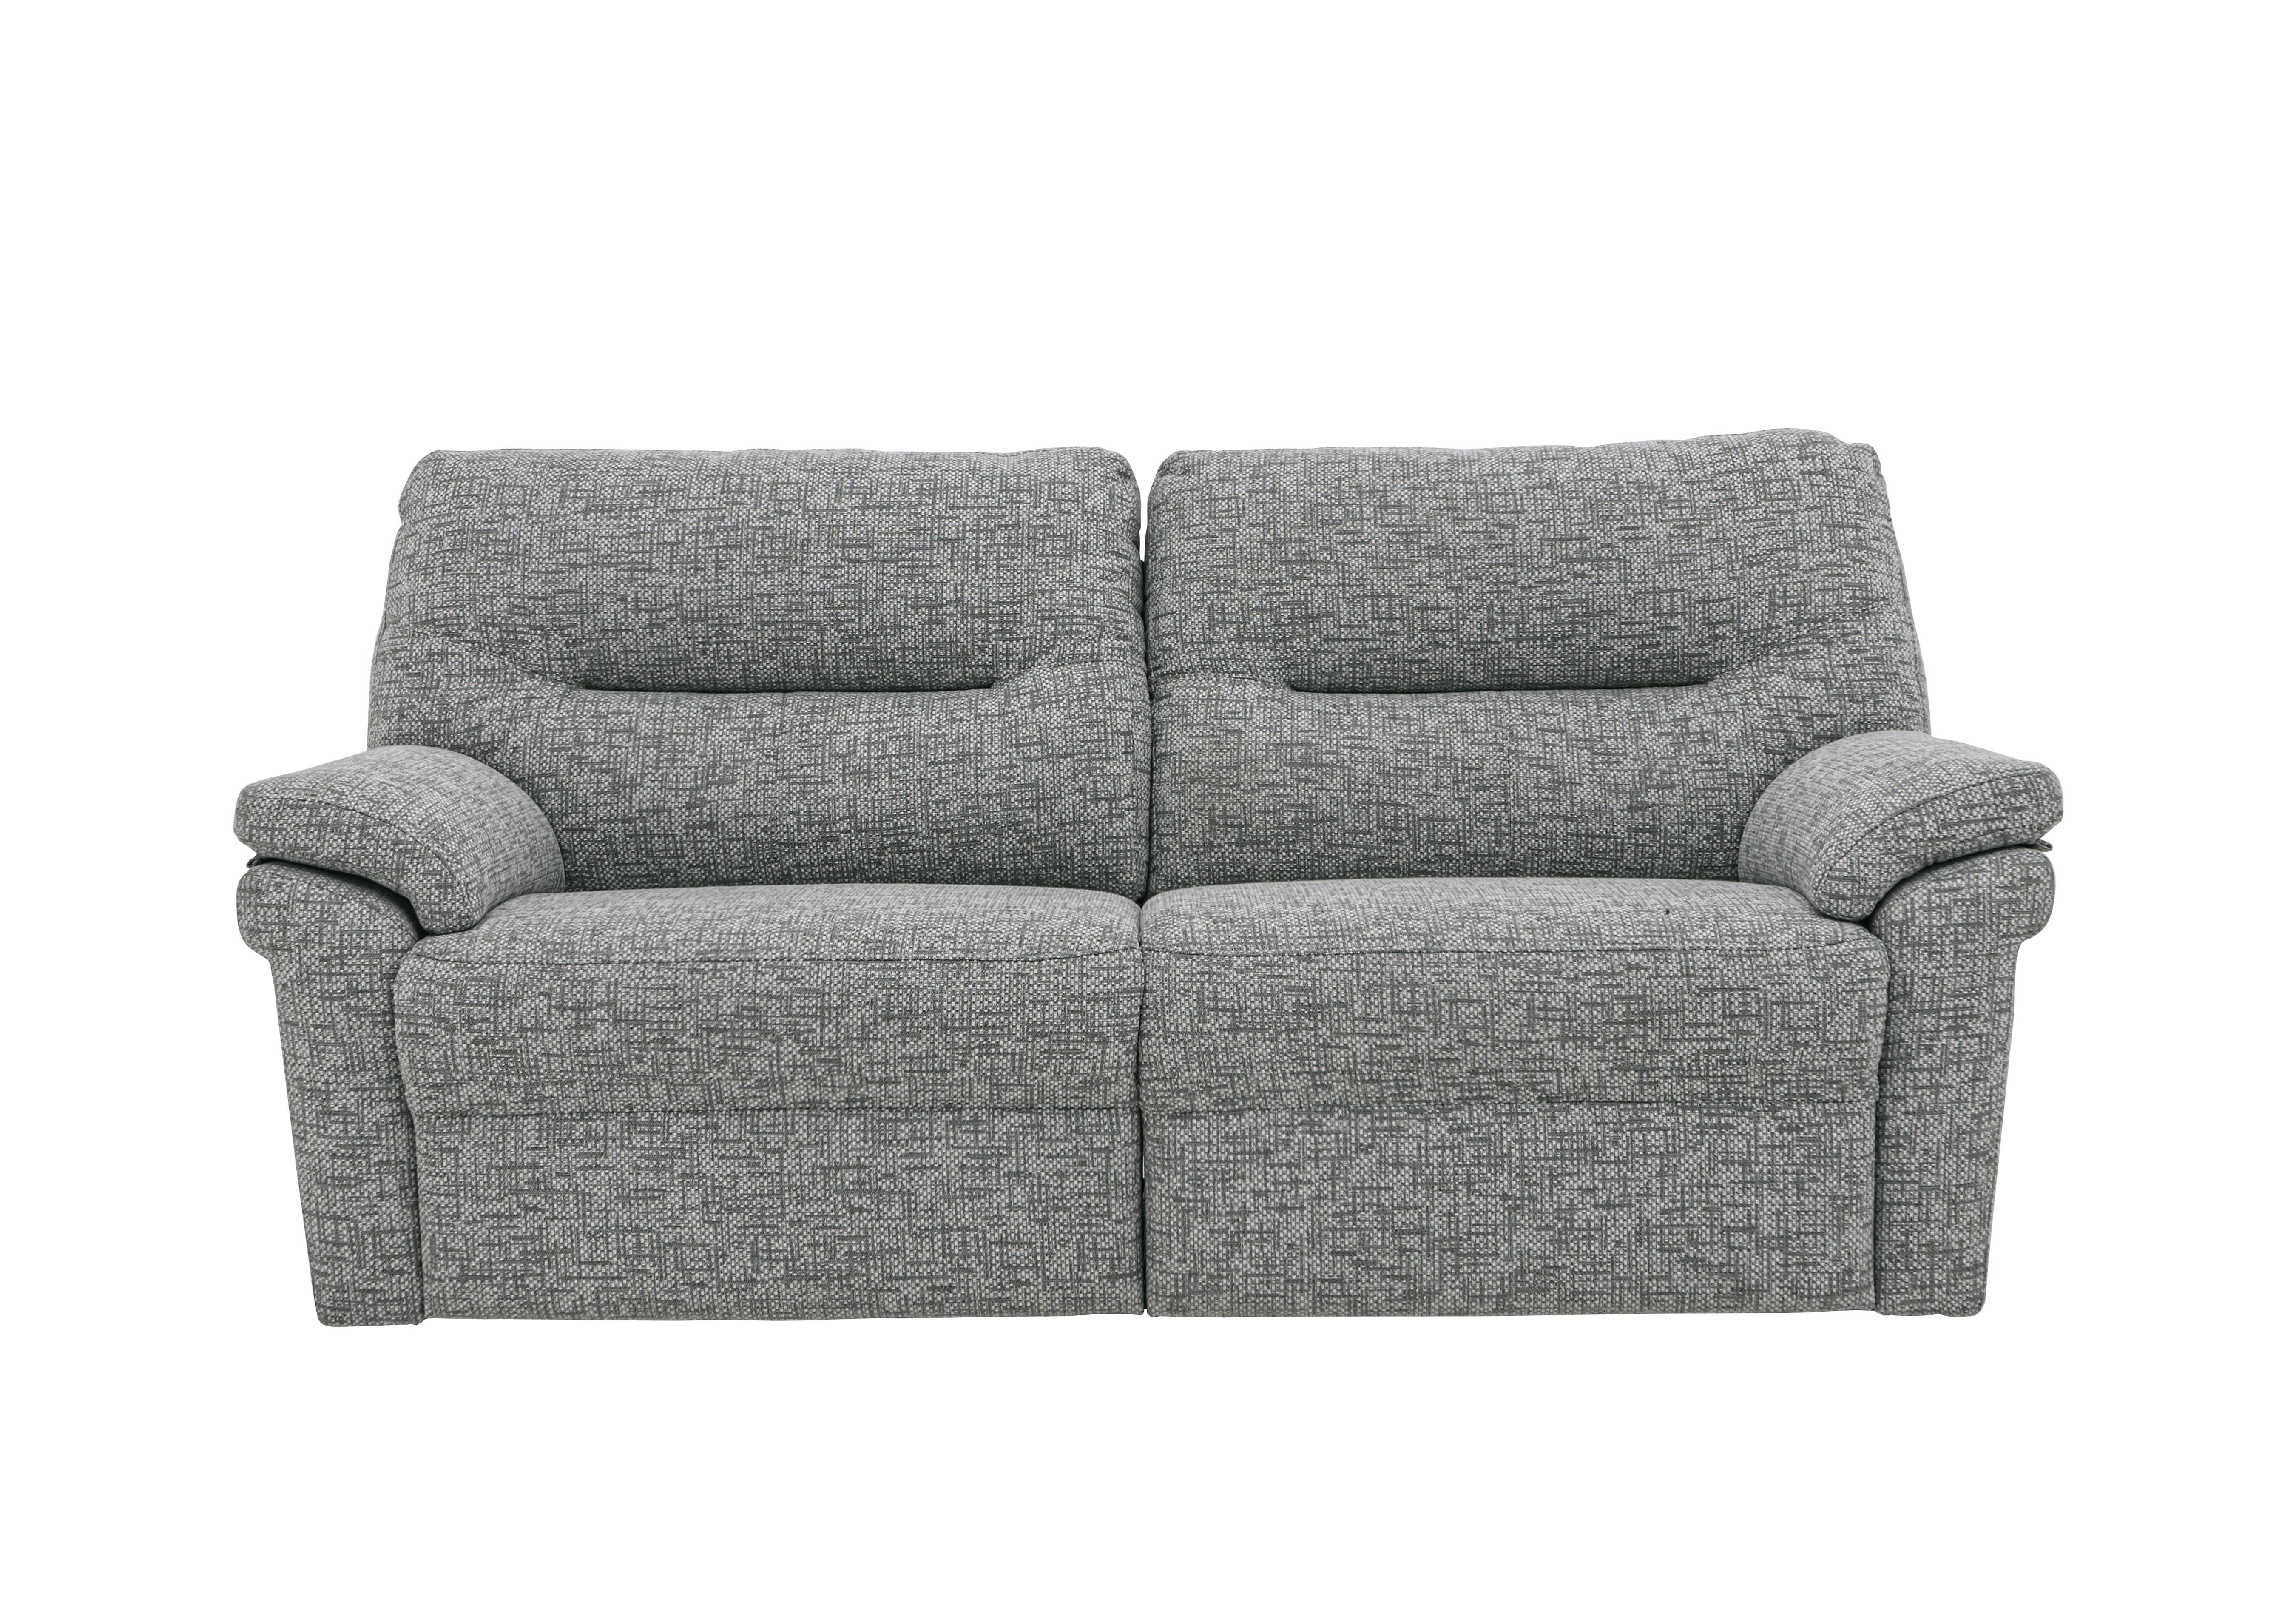 Seattle 3 Seater Fabric Power Recliner Sofa with Power Lumbar in B030 Remco Light Grey on Furniture Village